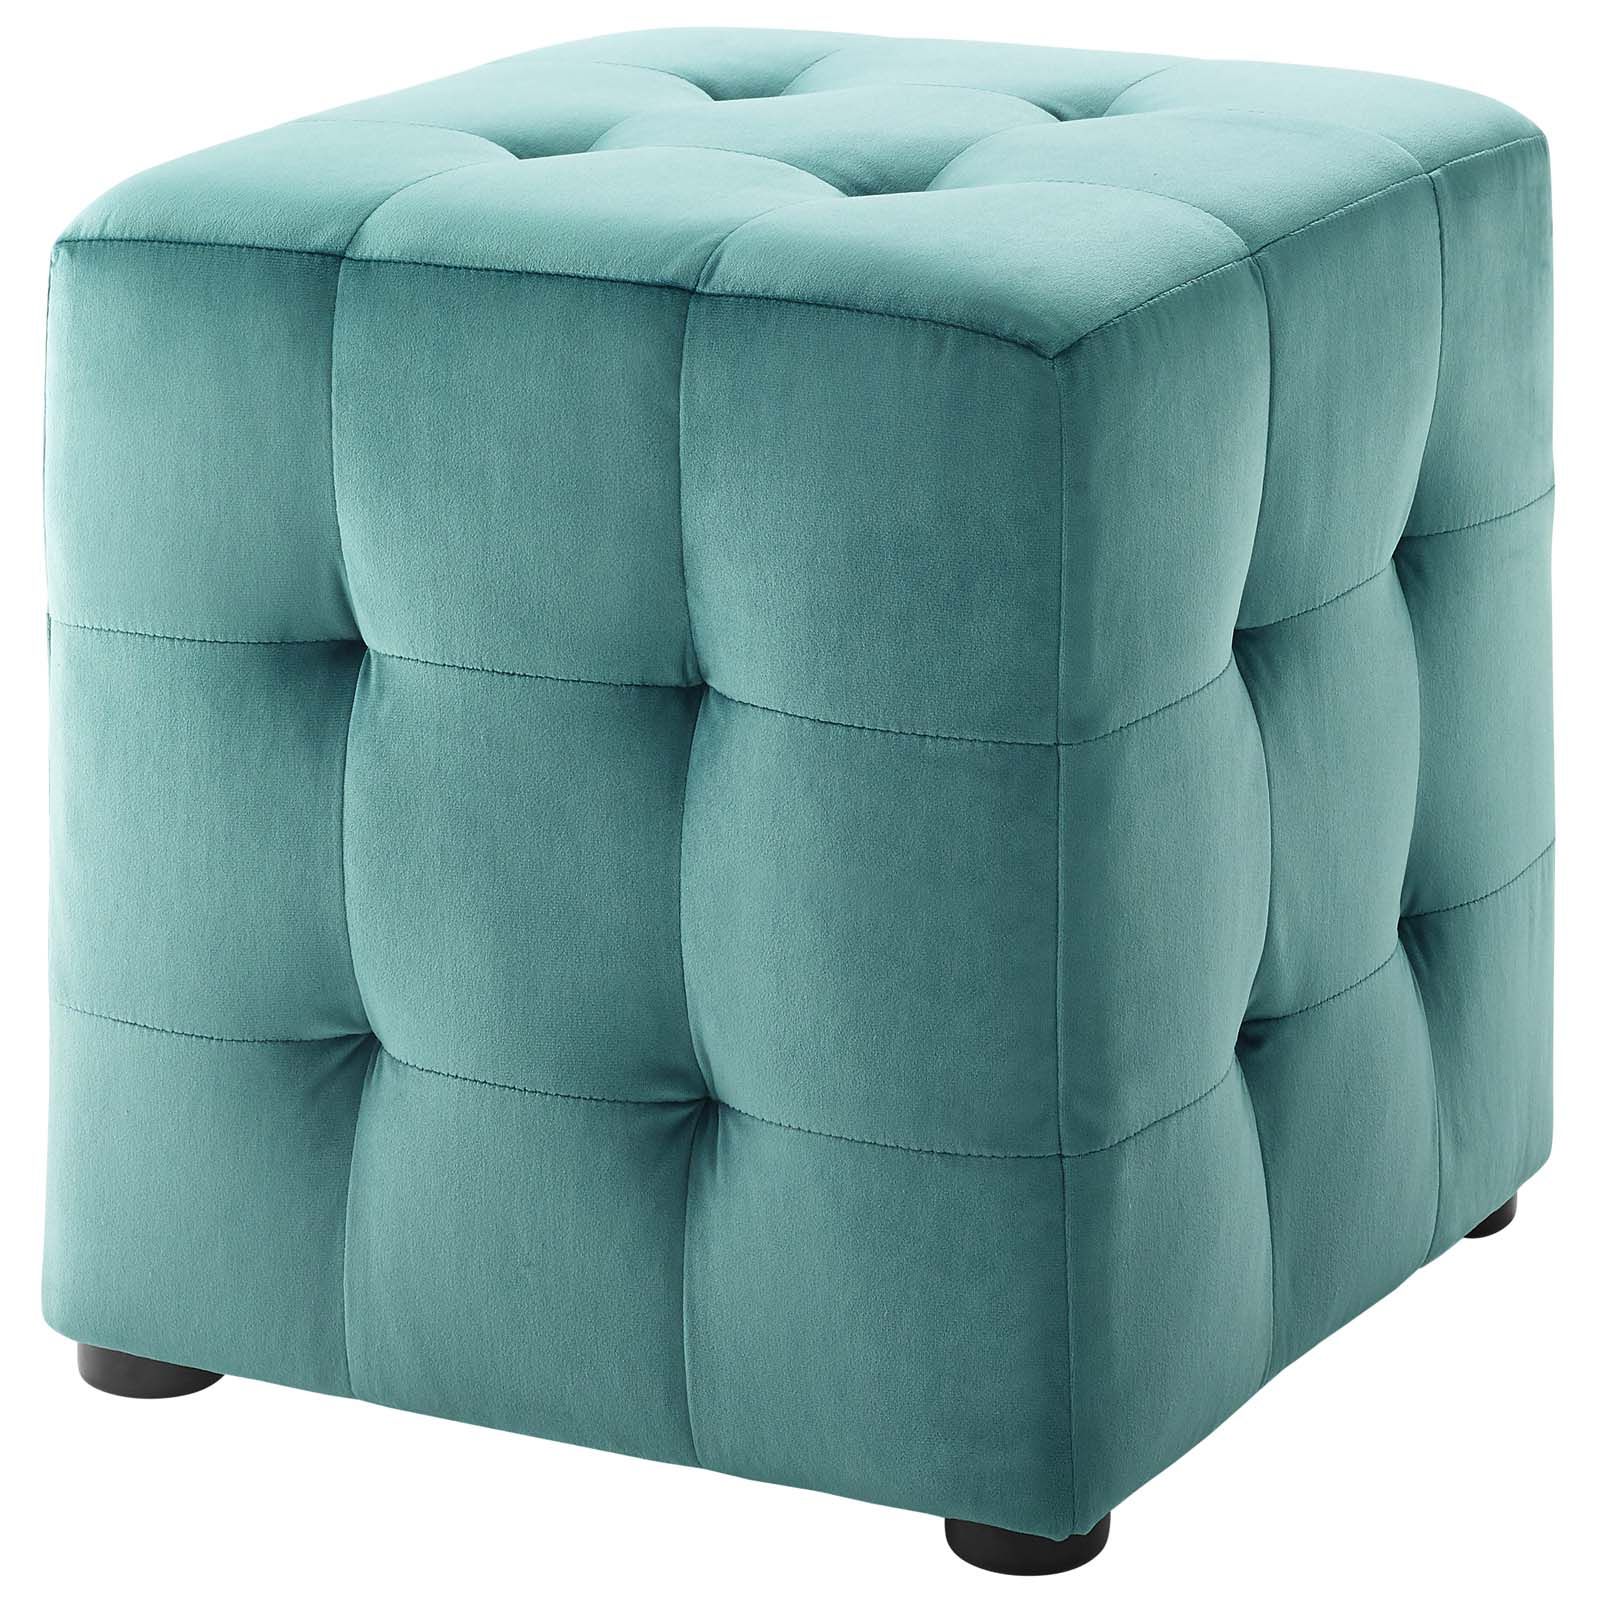 Best And Newest Natural Fabric Square Ottomans Throughout Contour Tufted Cube Performance Velvet Ottoman Teal (View 7 of 10)